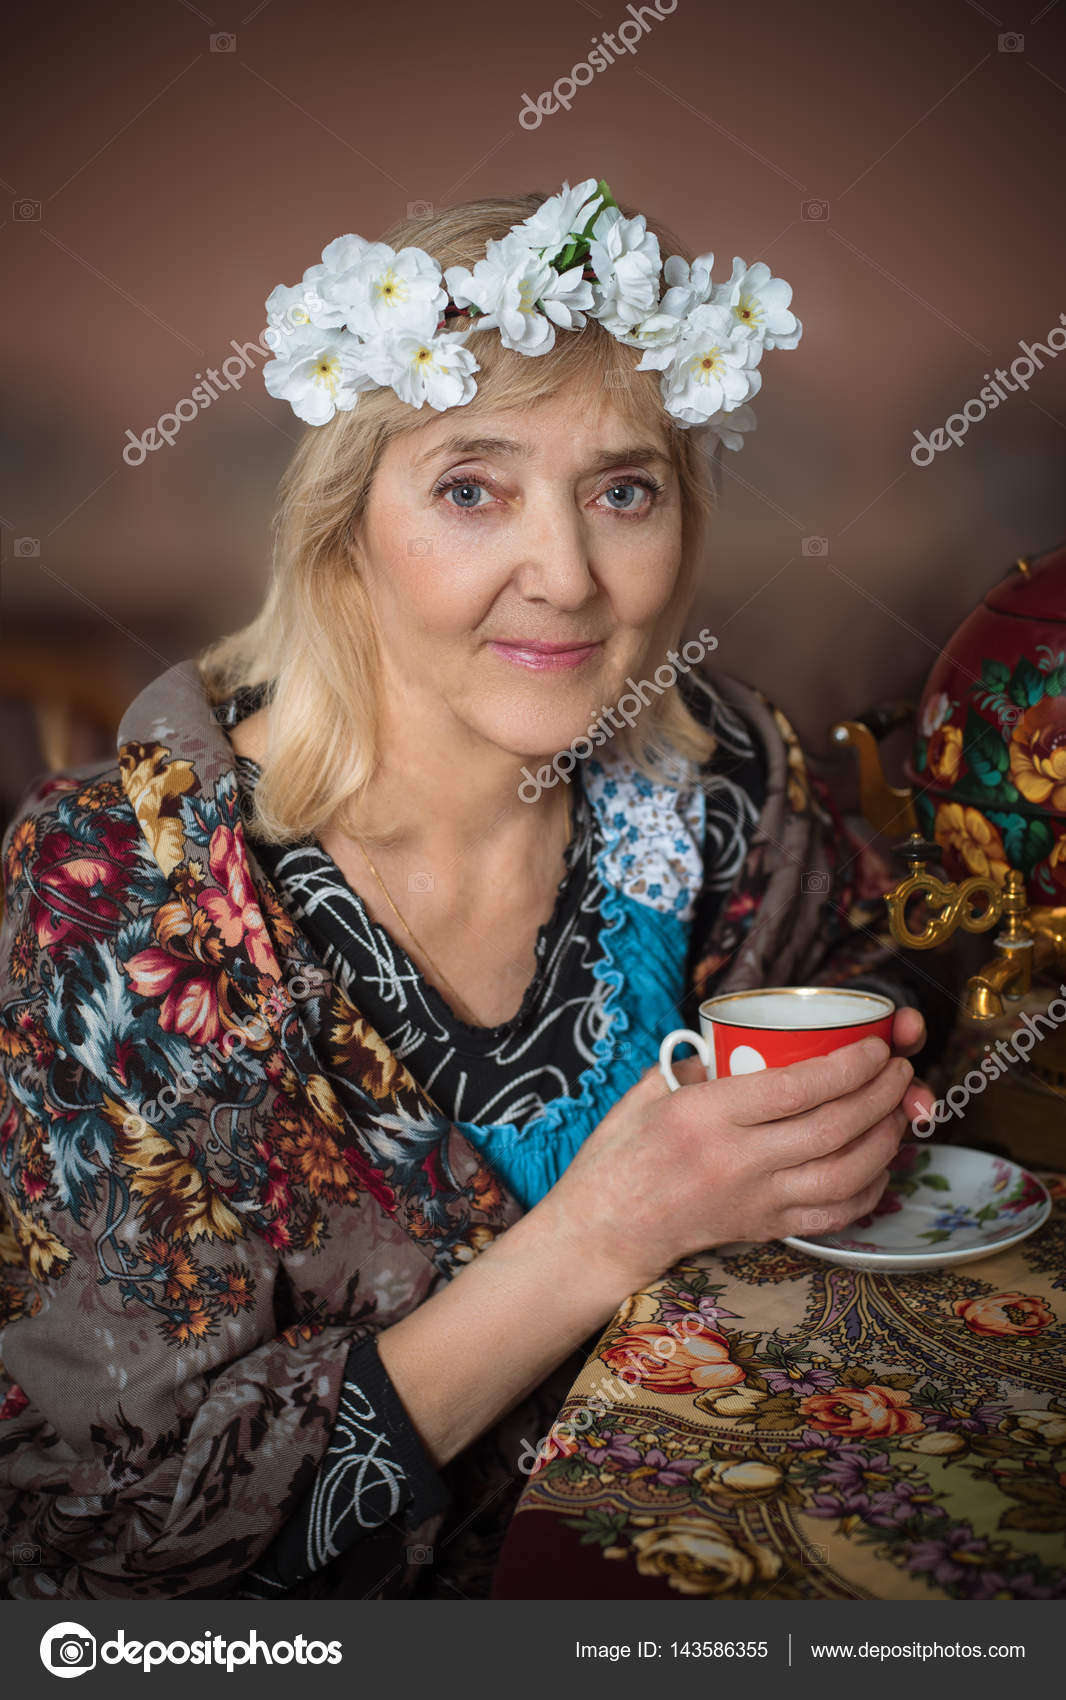 Of Woman In Traditional Russian 85